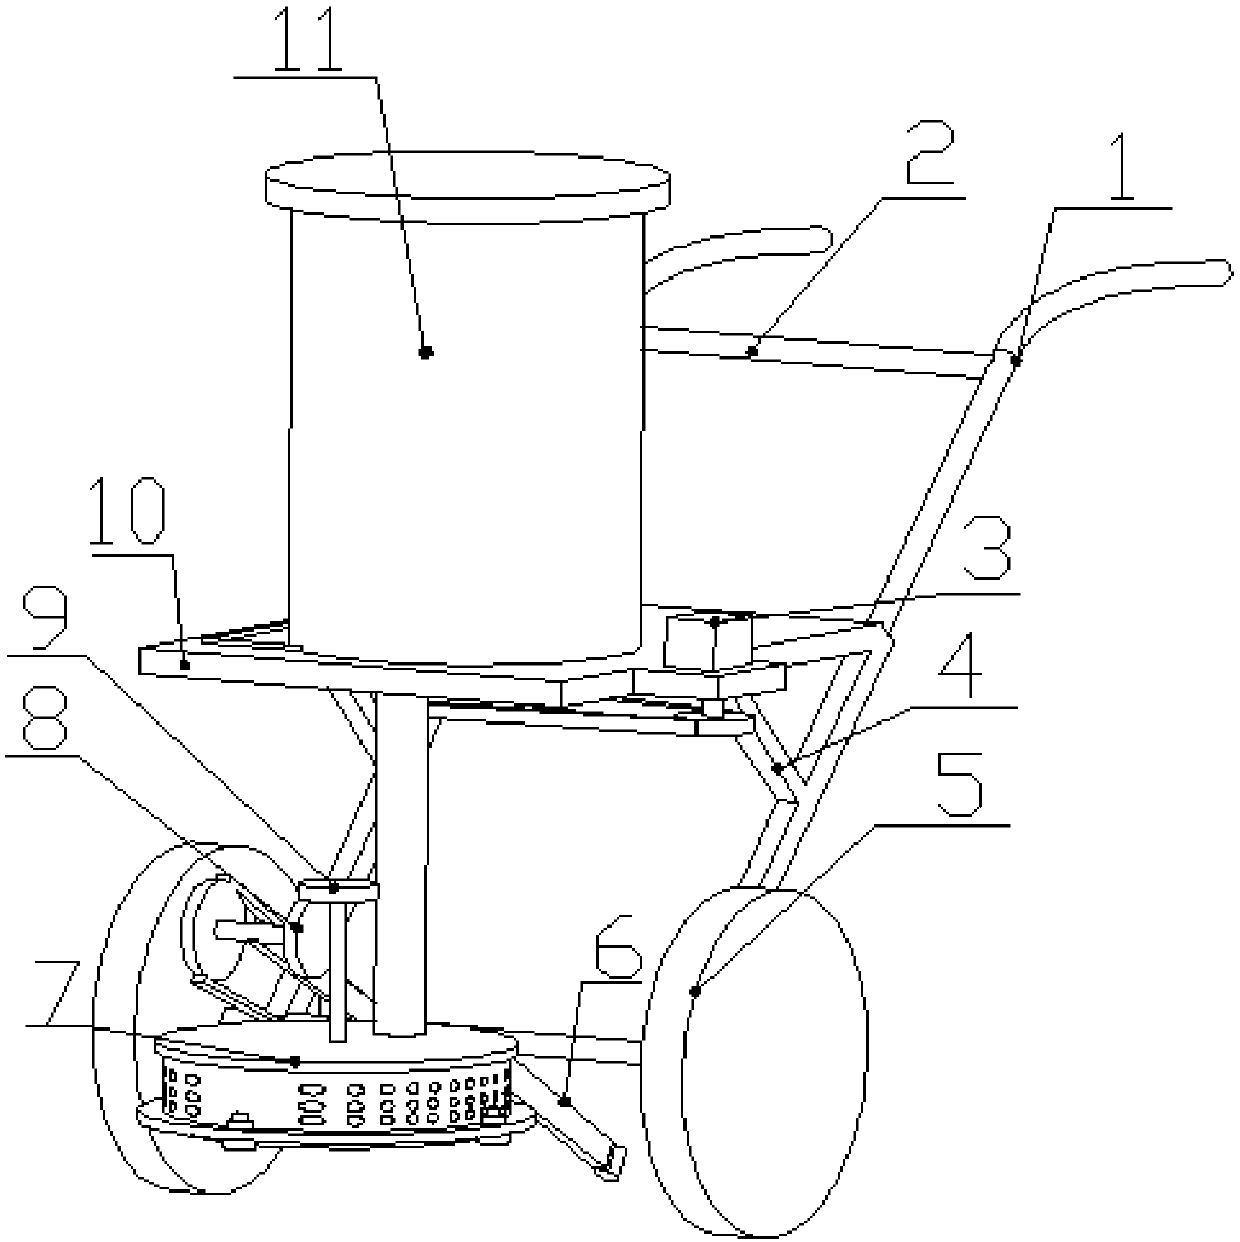 An agricultural centrifugal fertilizer application device